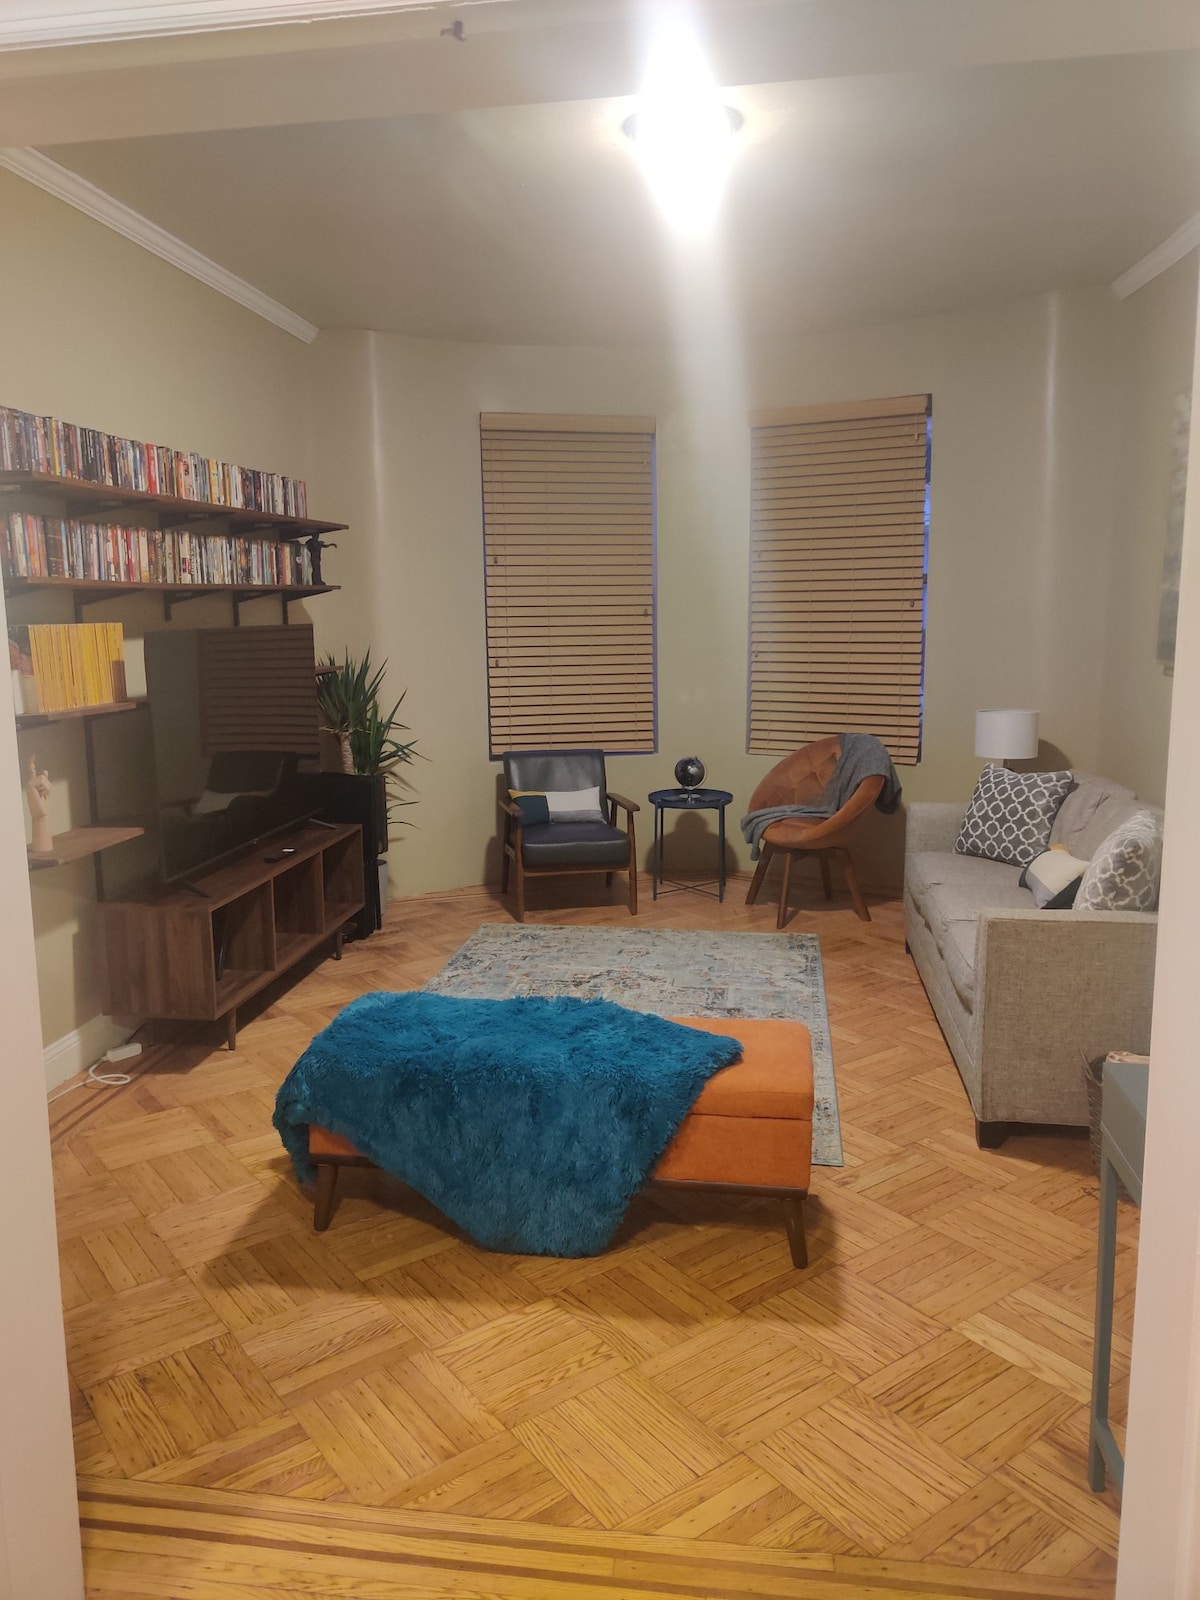 2 Bedroom Guest Suite - Bk Brick with a Backyard!